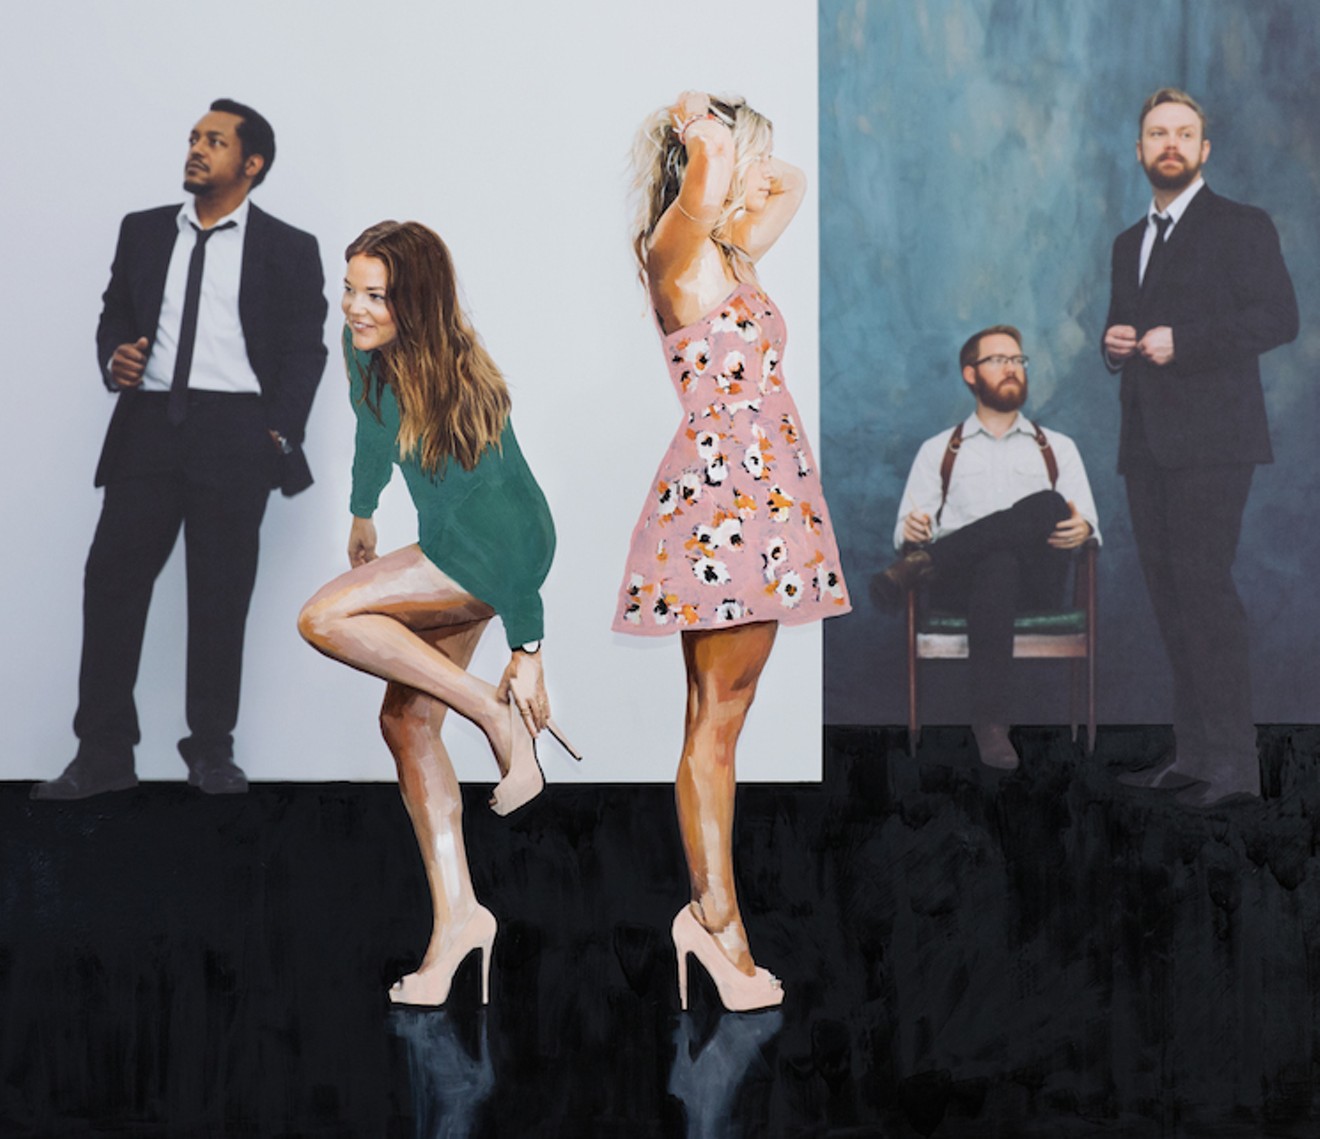 The album's cover is a collaboration between Paxton Maroney, Amanda Page and Haylee Ryan, who is also a painter.